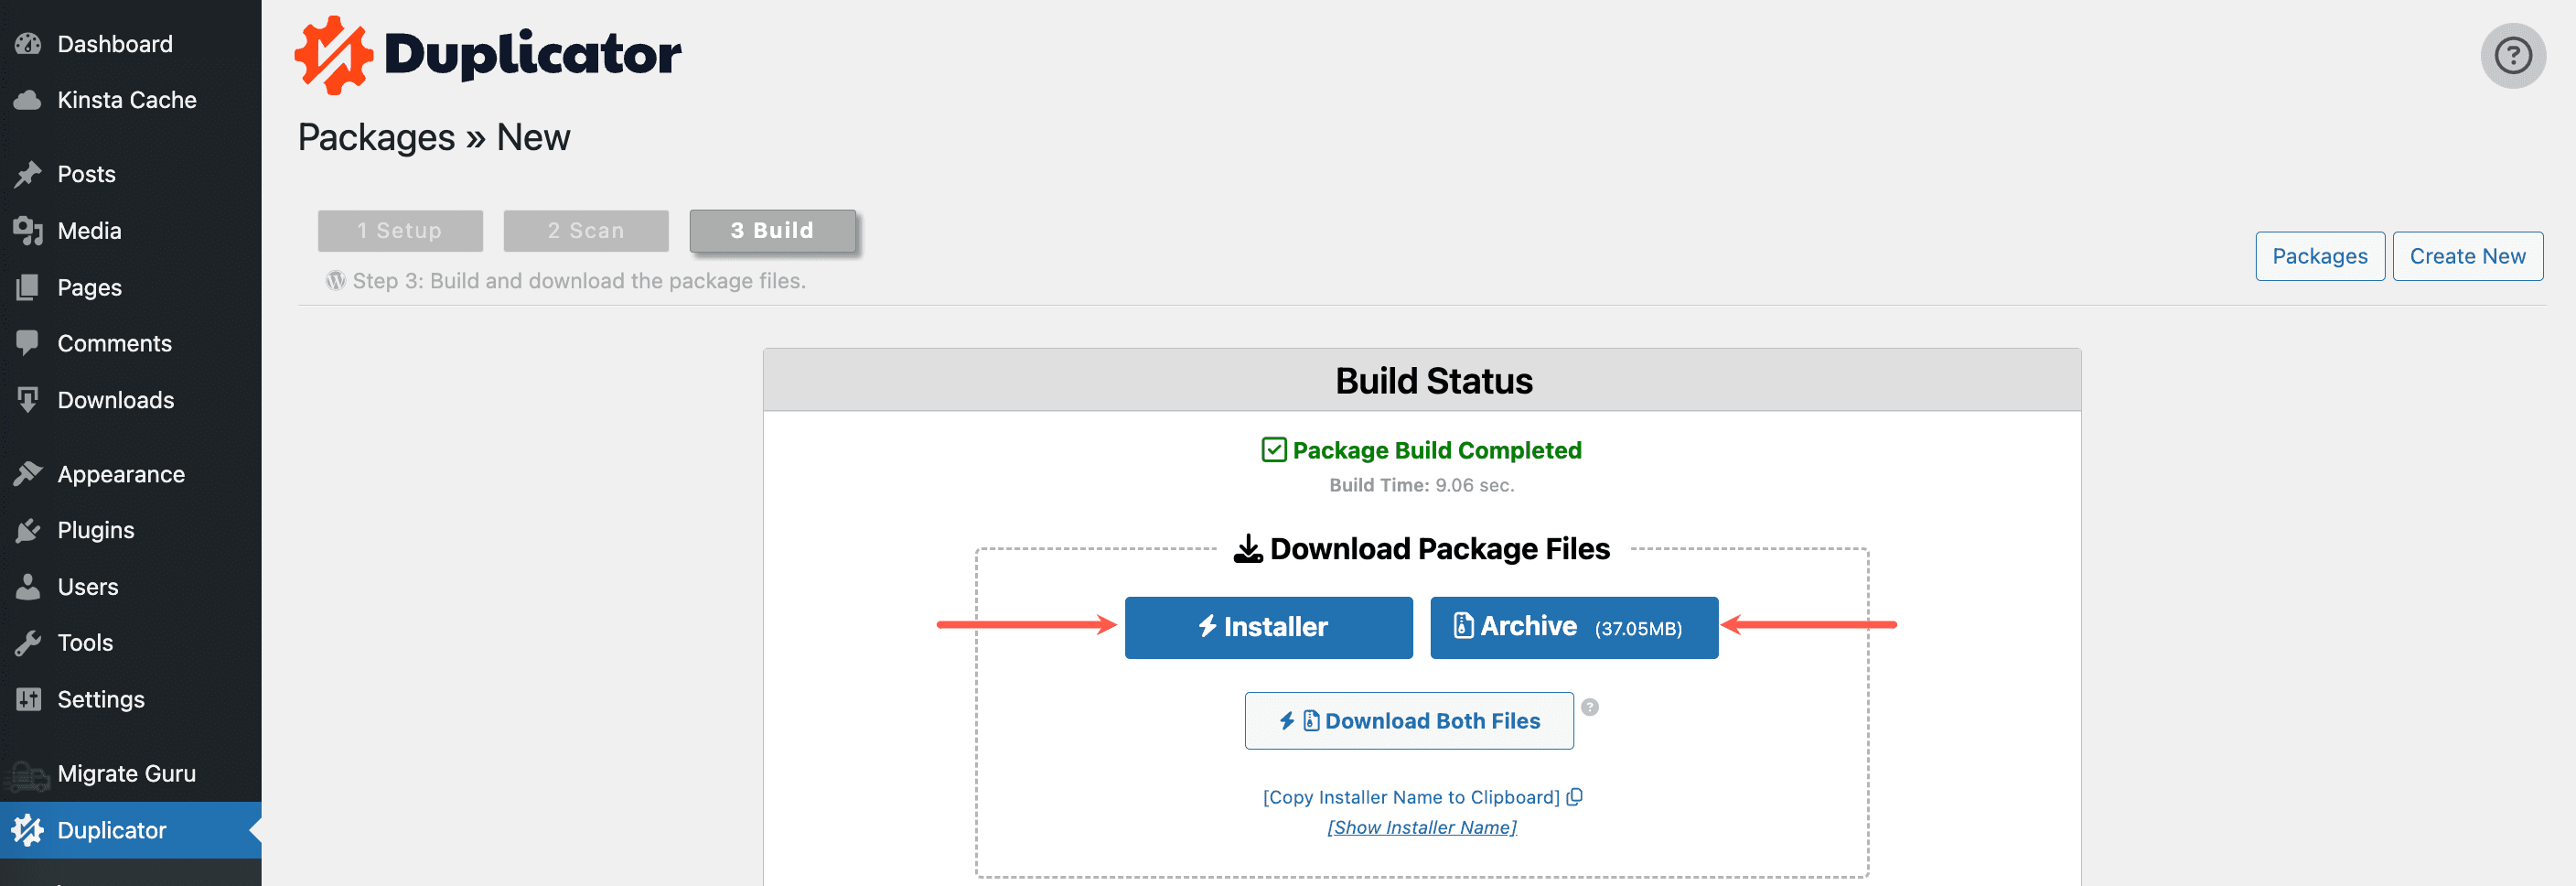 Download archive and installer files